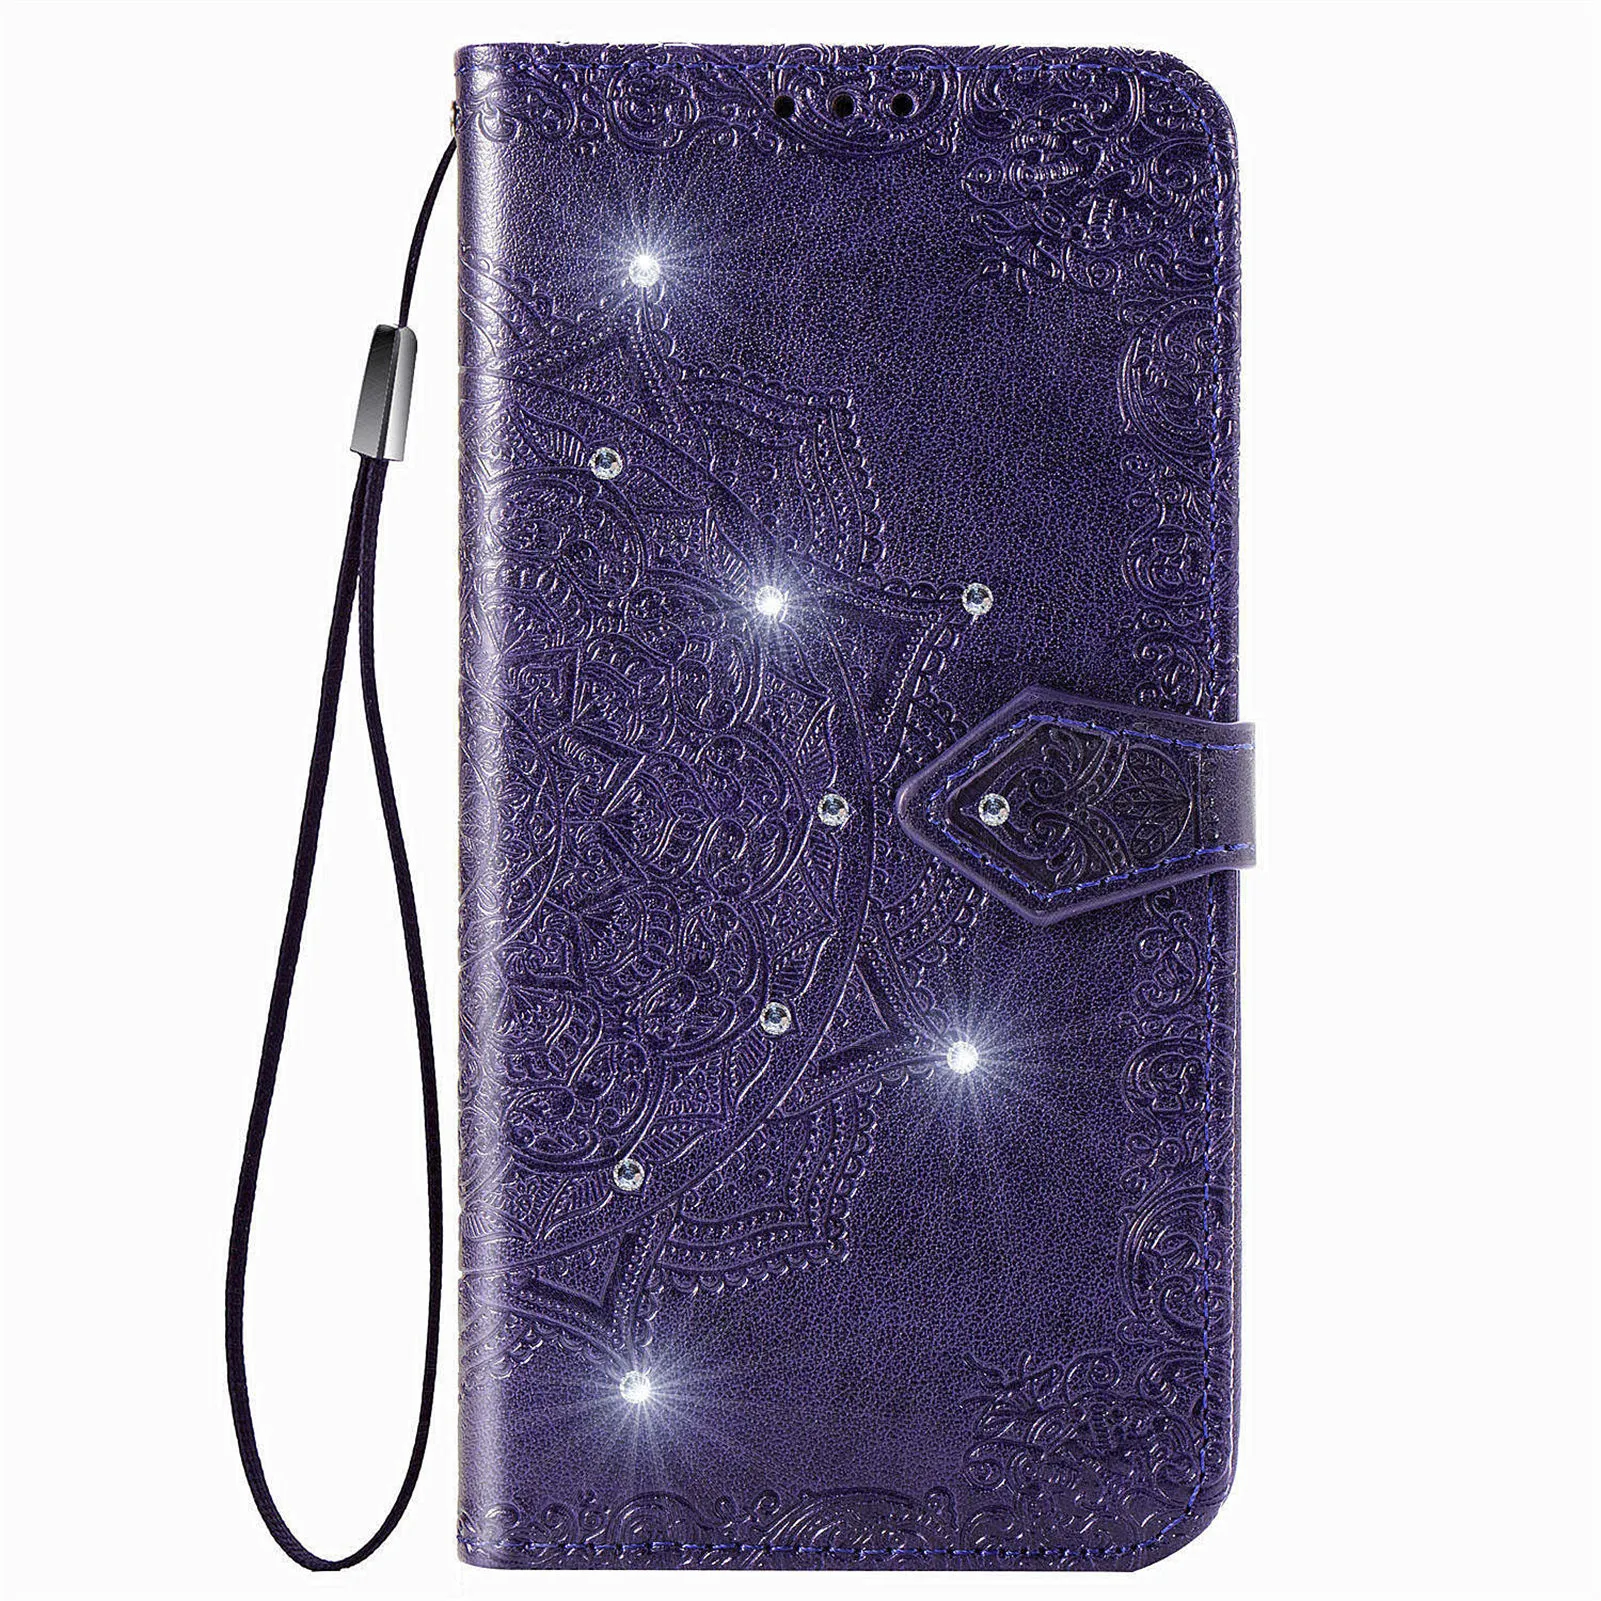 Wallet Phone Cases for Samsung Galaxy S23 S22 S21 S20 Note20 Ultra Note10 Plus Mandala Embossing Rhinestone PU Leather Flip Stand Cover Case with Card Slots